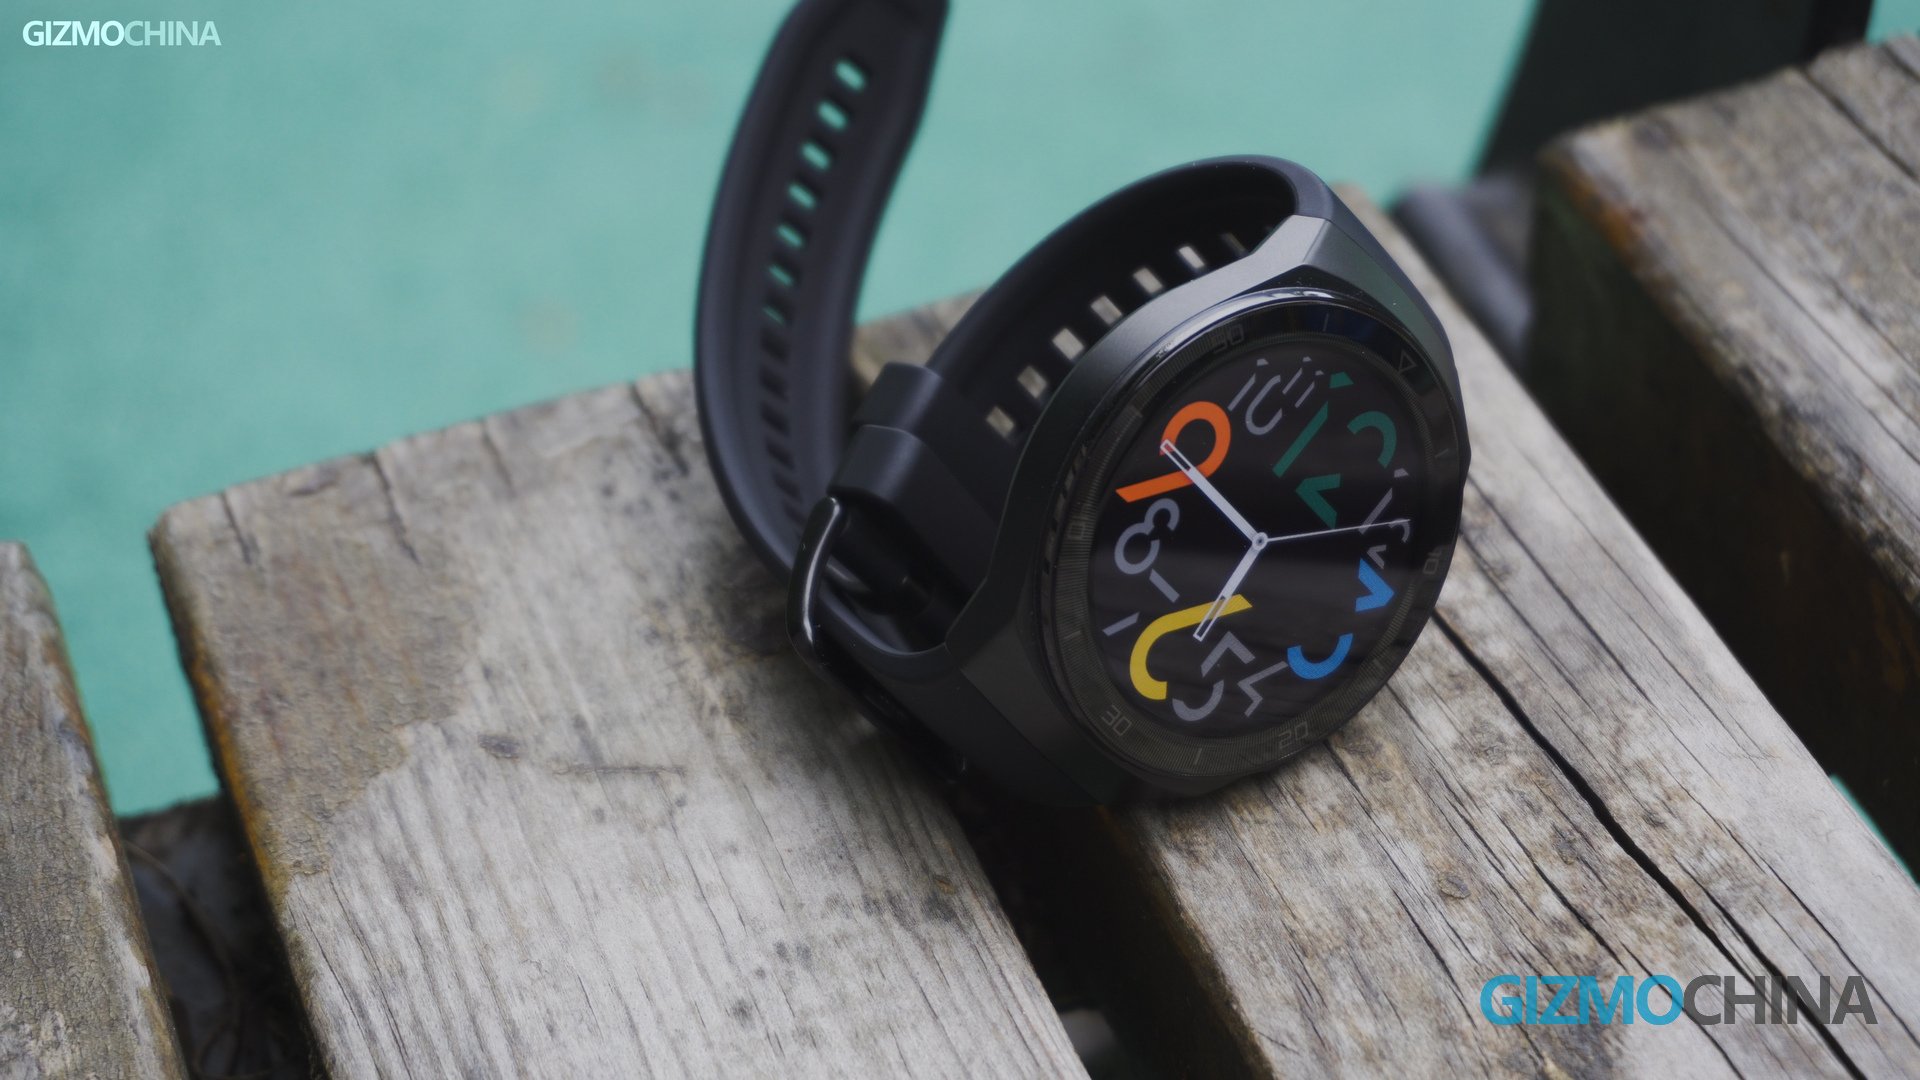 Huawei Watch GT 2e Review: A Sporty Smartwatch with Accurate 